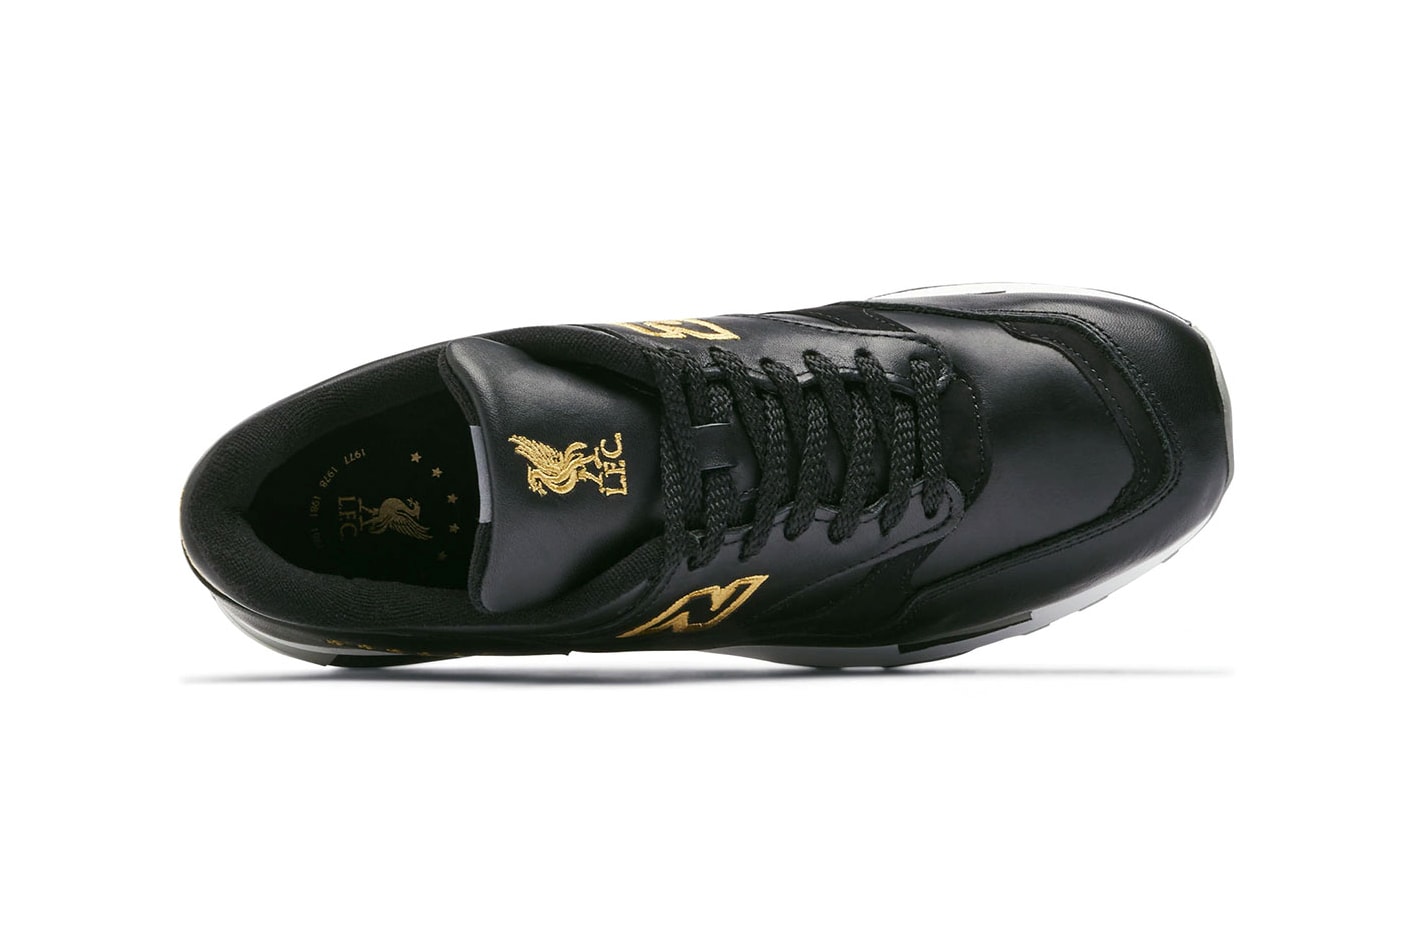 New Balance Made in UK 1500 Liverpool FC black and gold limited edition six times collection 